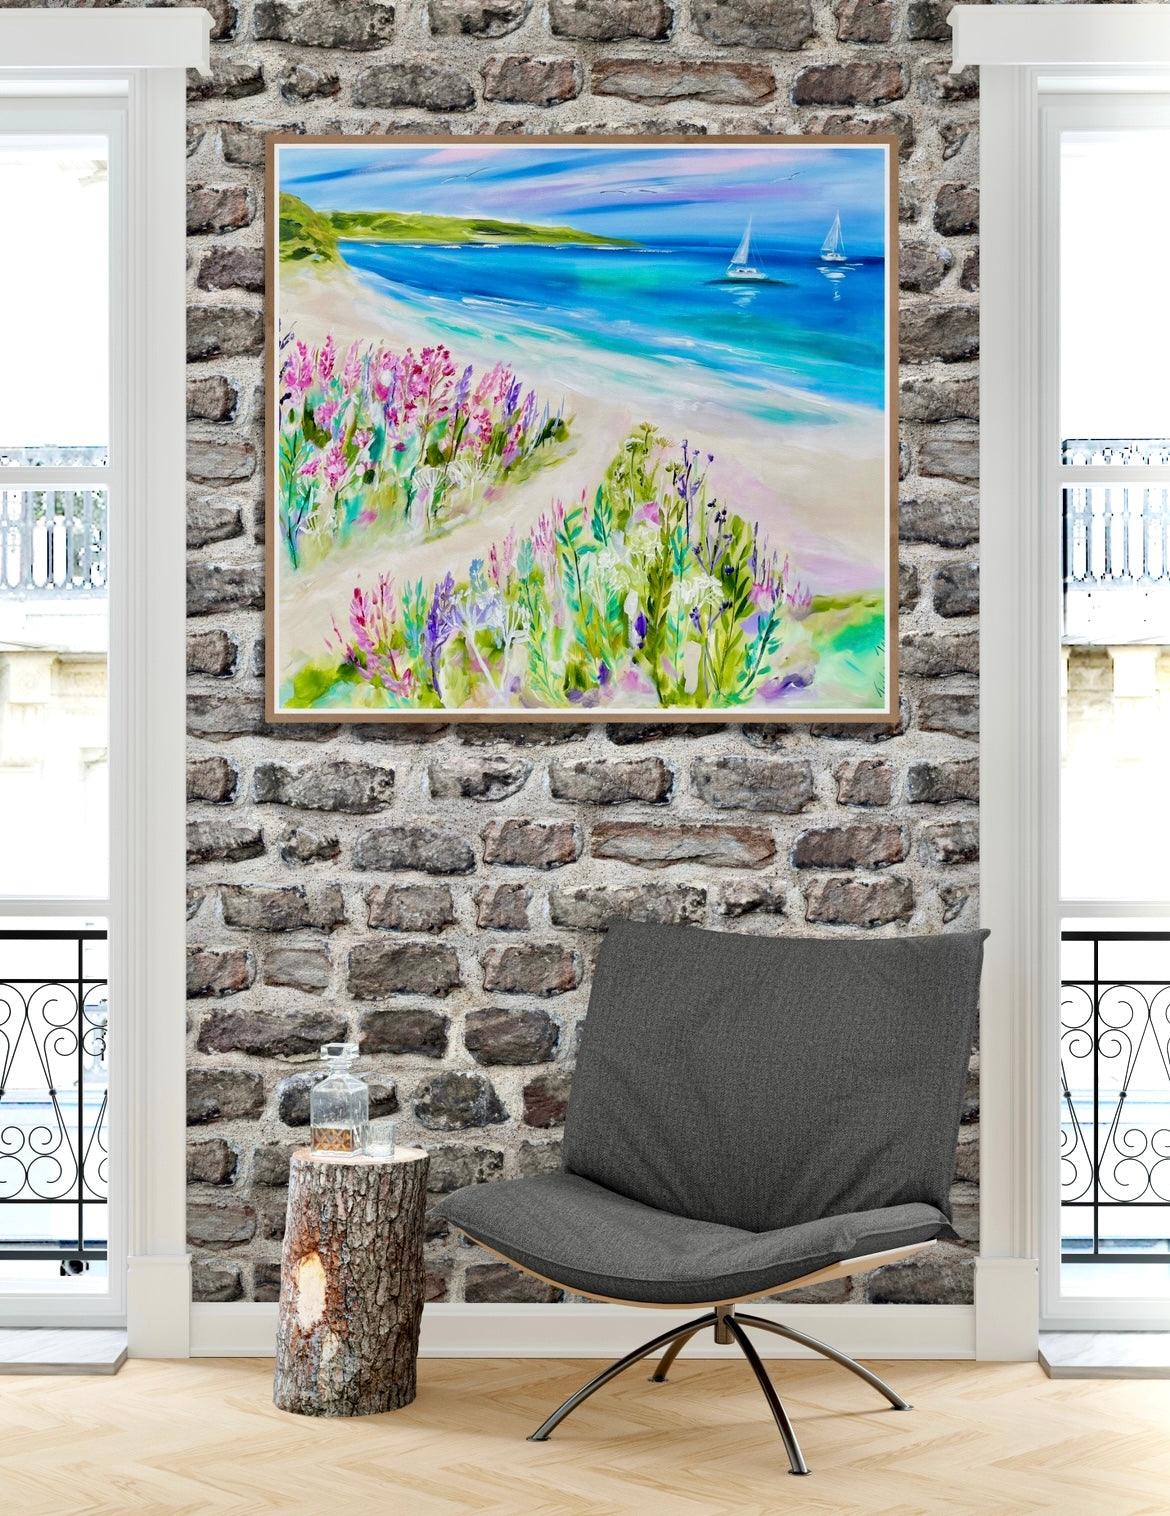 My Island Life -1.1x1m - Original Artwork - Available by Commission